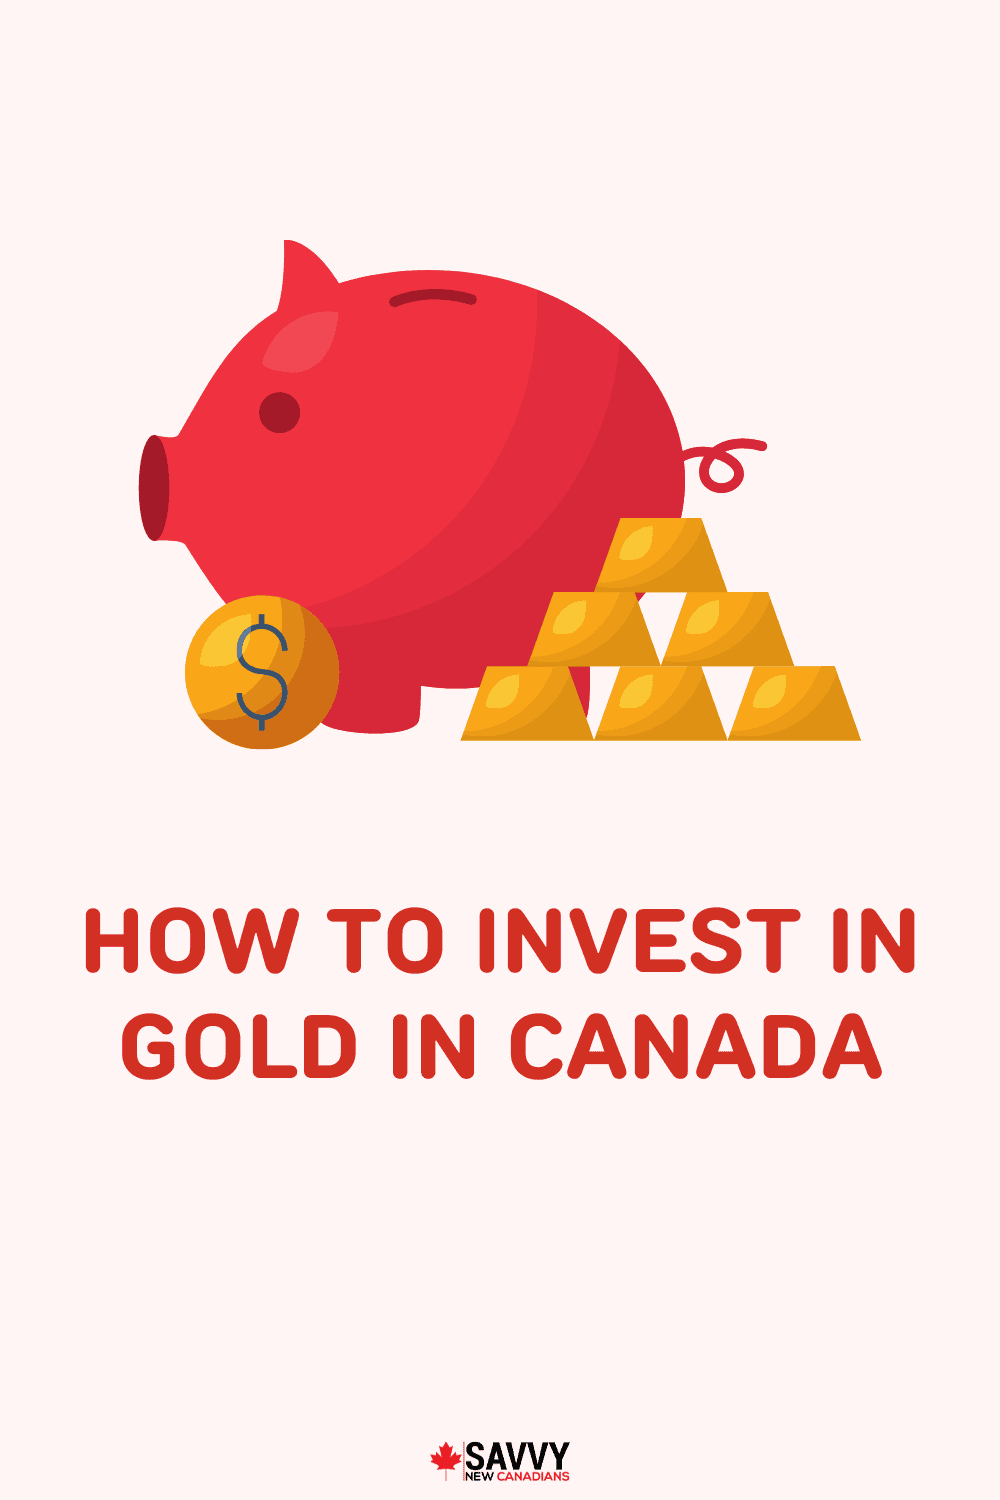 How To Invest in Gold in Canada in 2022: 6 Easy Ways for Beginners